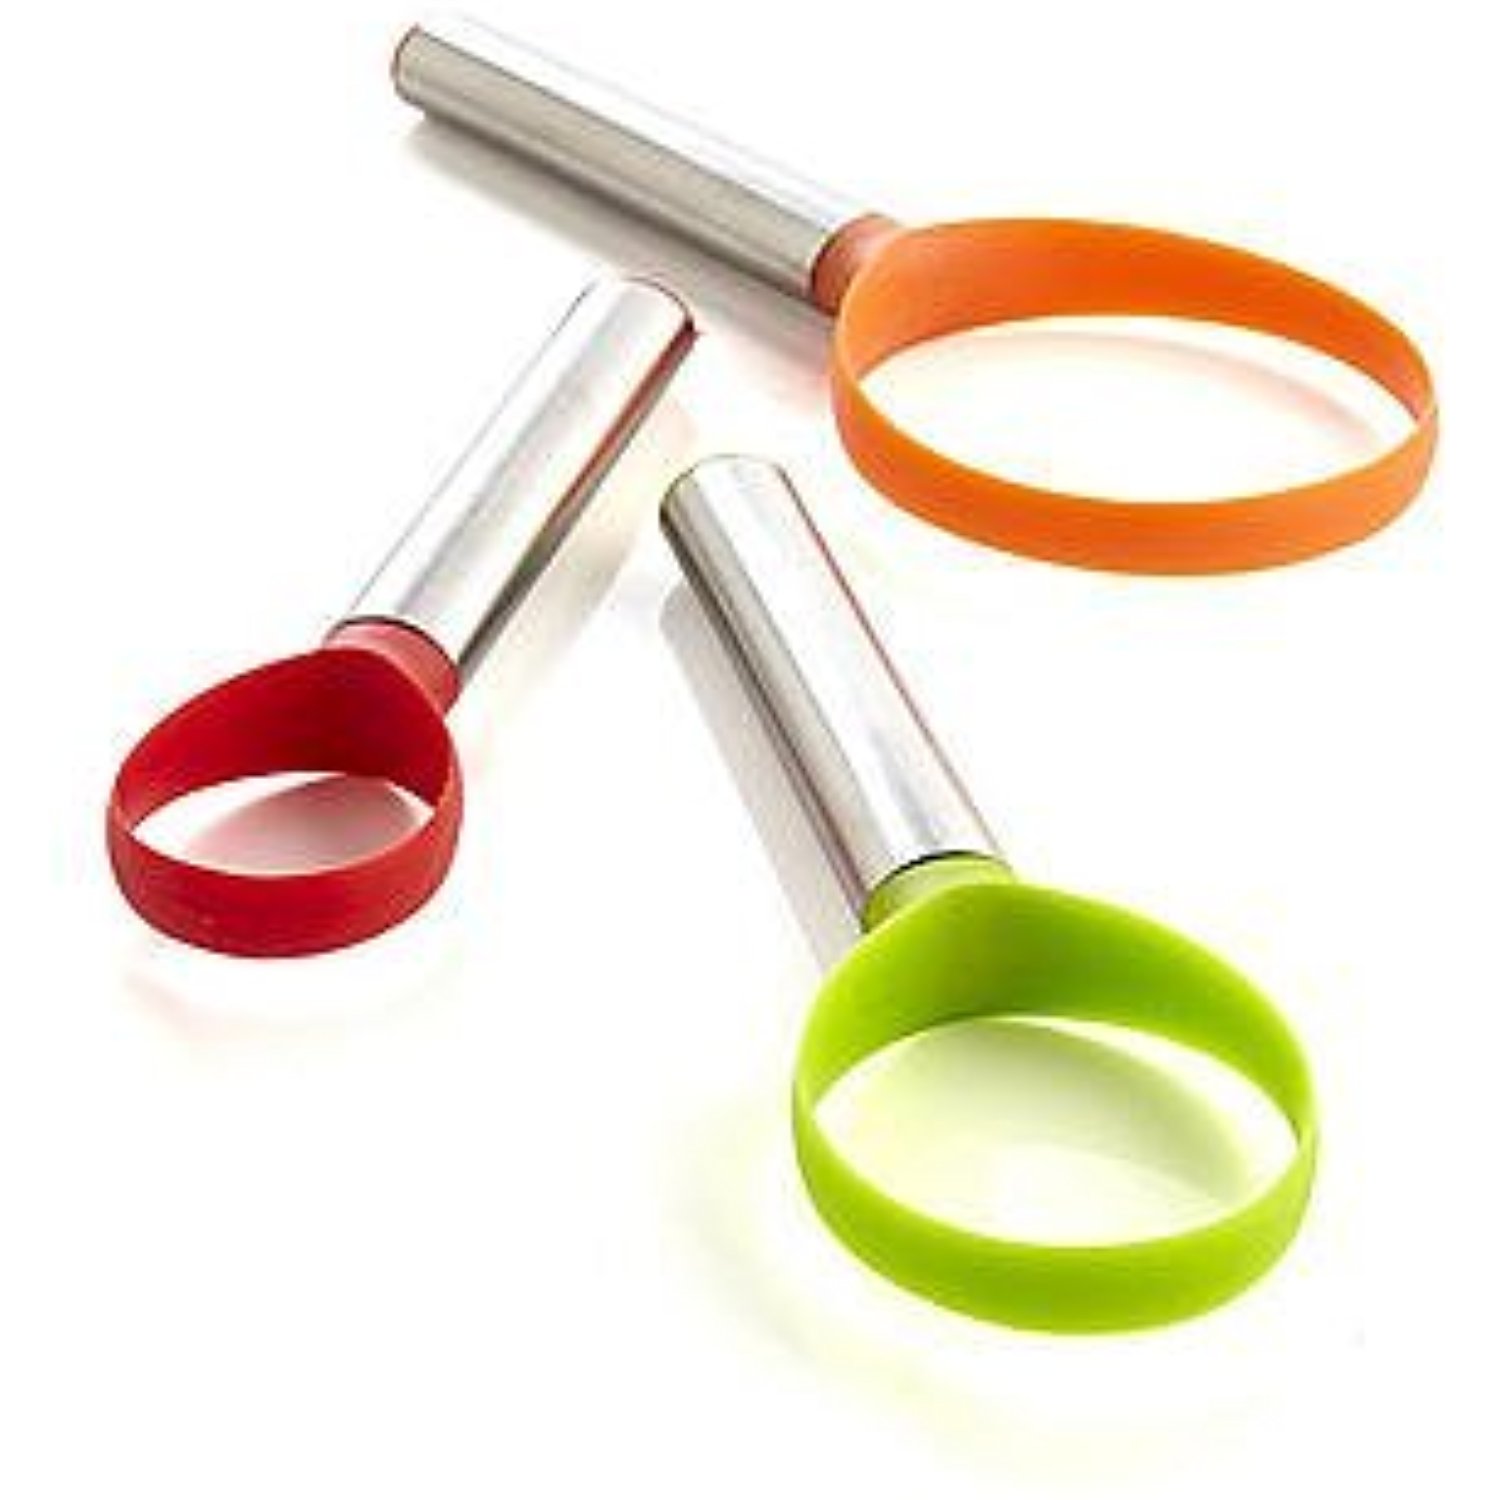 Picture of Bethany Housewares 150 Fruit Scoops - Set of 3